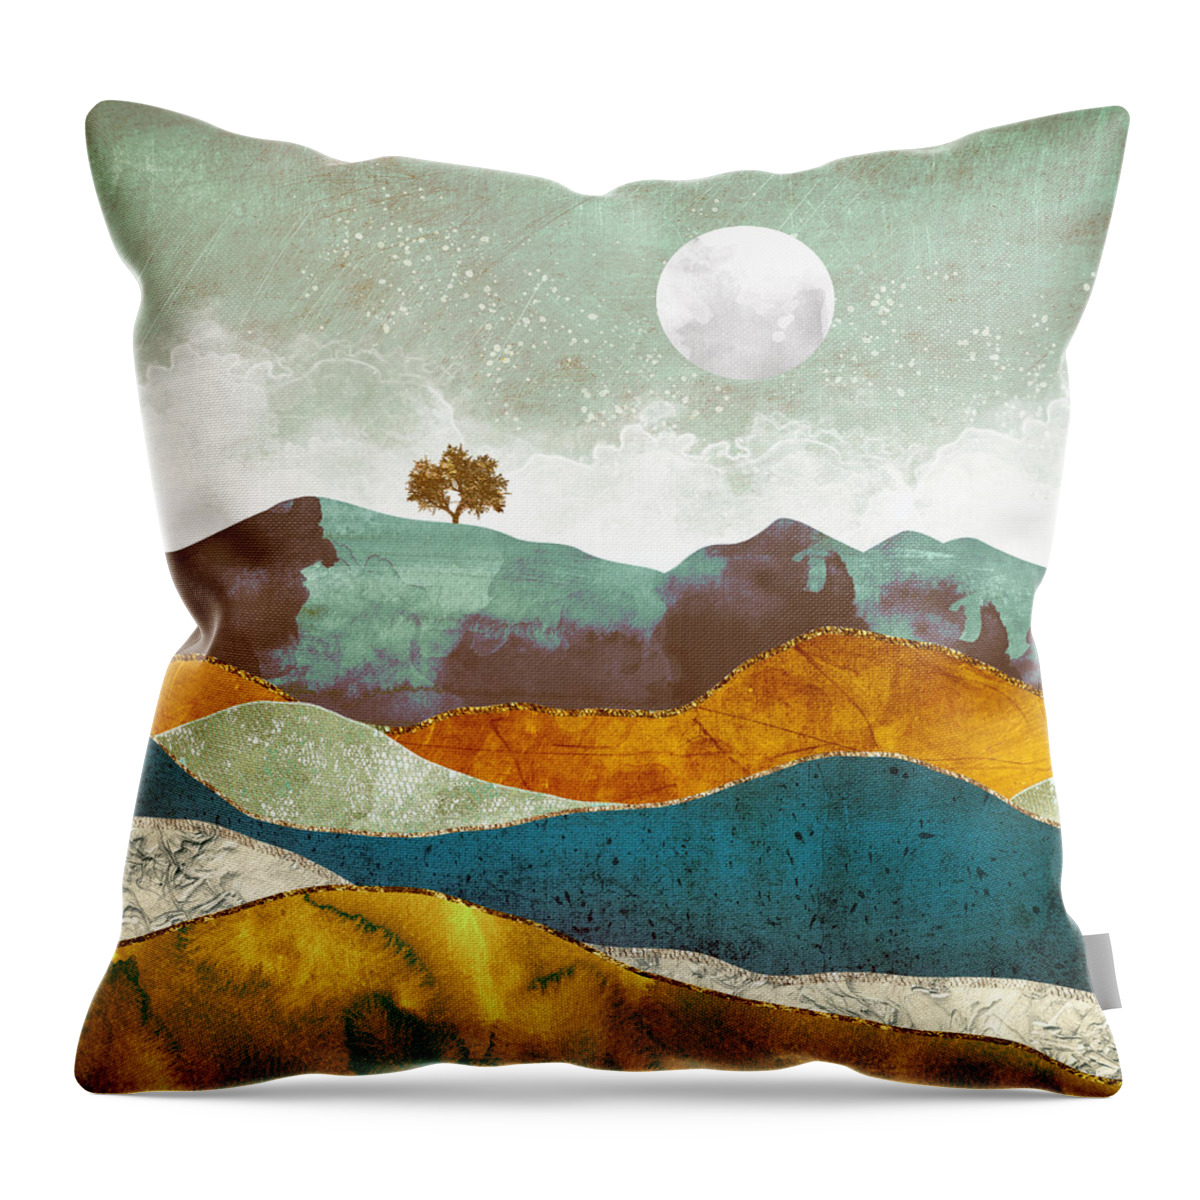 Moon Throw Pillow featuring the digital art Night Fog by Spacefrog Designs